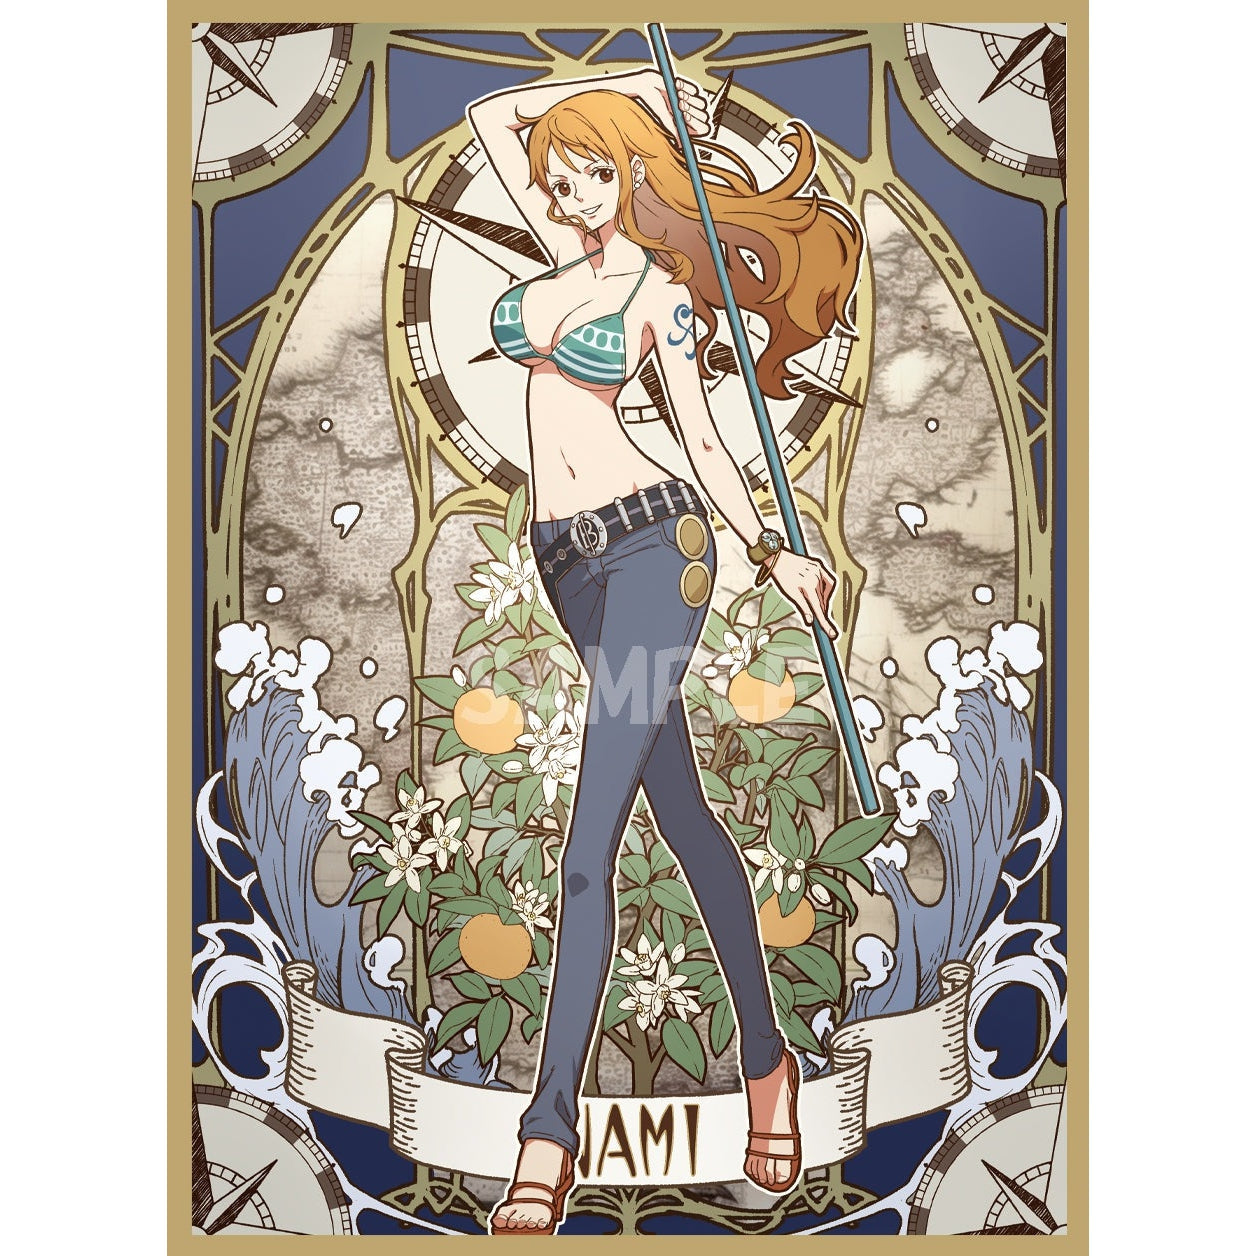 Yamato Sleeve by Chaos Goddess – Exp. Share Collectible